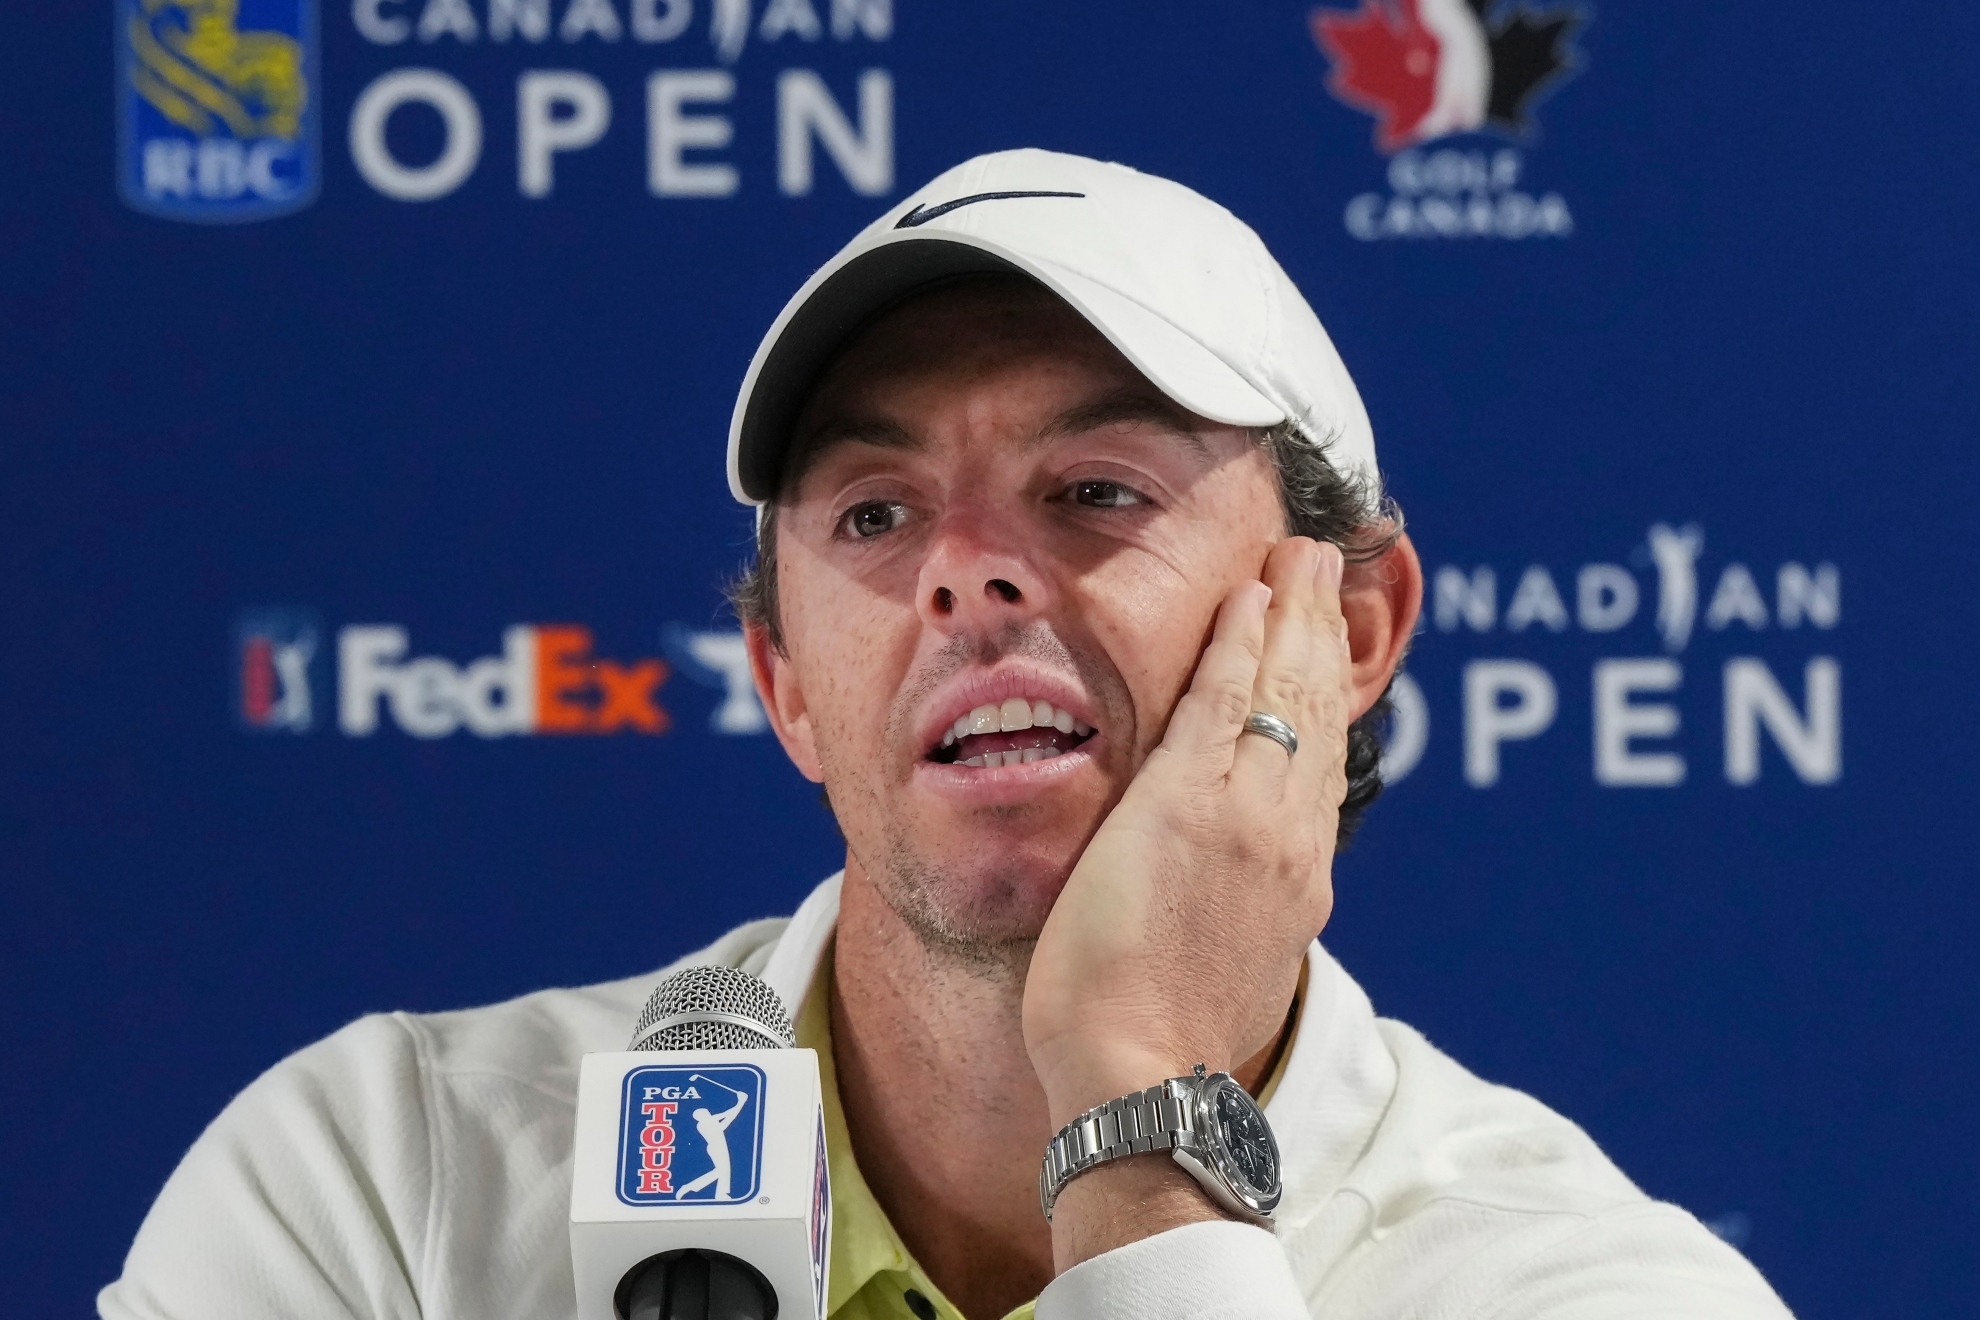 LIV Golf executive rejects Rory McIlroy, brands him unwanted for team format